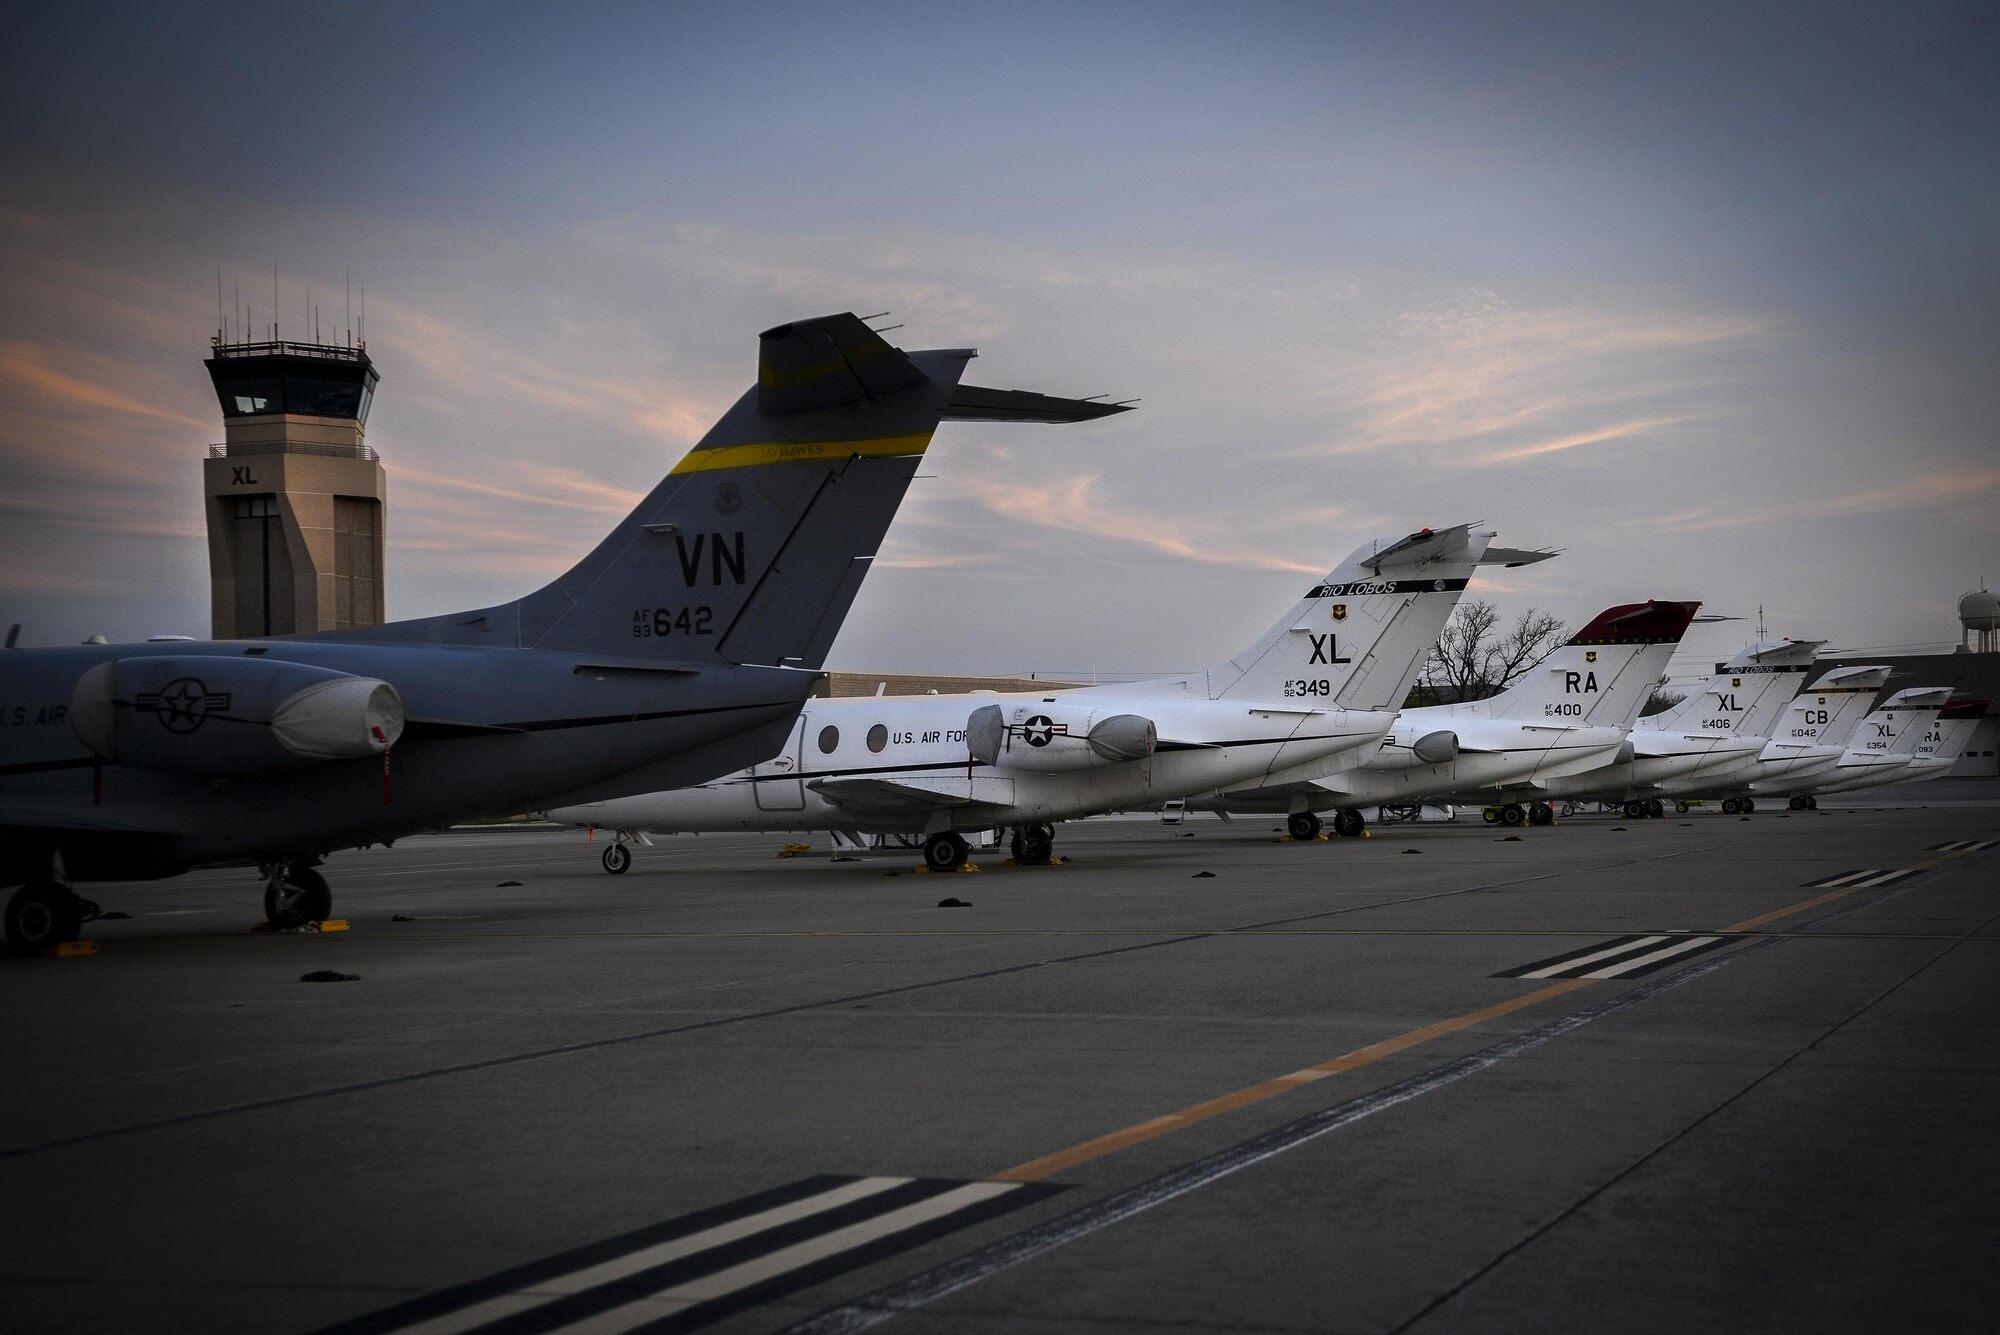 T-1A Jayhawks from throughout the Air Education and Training Command sit on the flight line of Laughlin Air Force Base, Texas, March 15, 2016. Training bases - including Vance AFB, Okla., Joint Base San Antonio-Randolph AFB, Texas and Columbus AFB, Miss. – loaned some of their aircraft to help continue student pilot training after a devastating hail storm damaged Laughlin’s aircraft. The support received helps Laughlin complete its primary mission: to graduate the world’s best military pilots. (U.S. Air Force photo by Senior Airman Ariel D. Partlow)